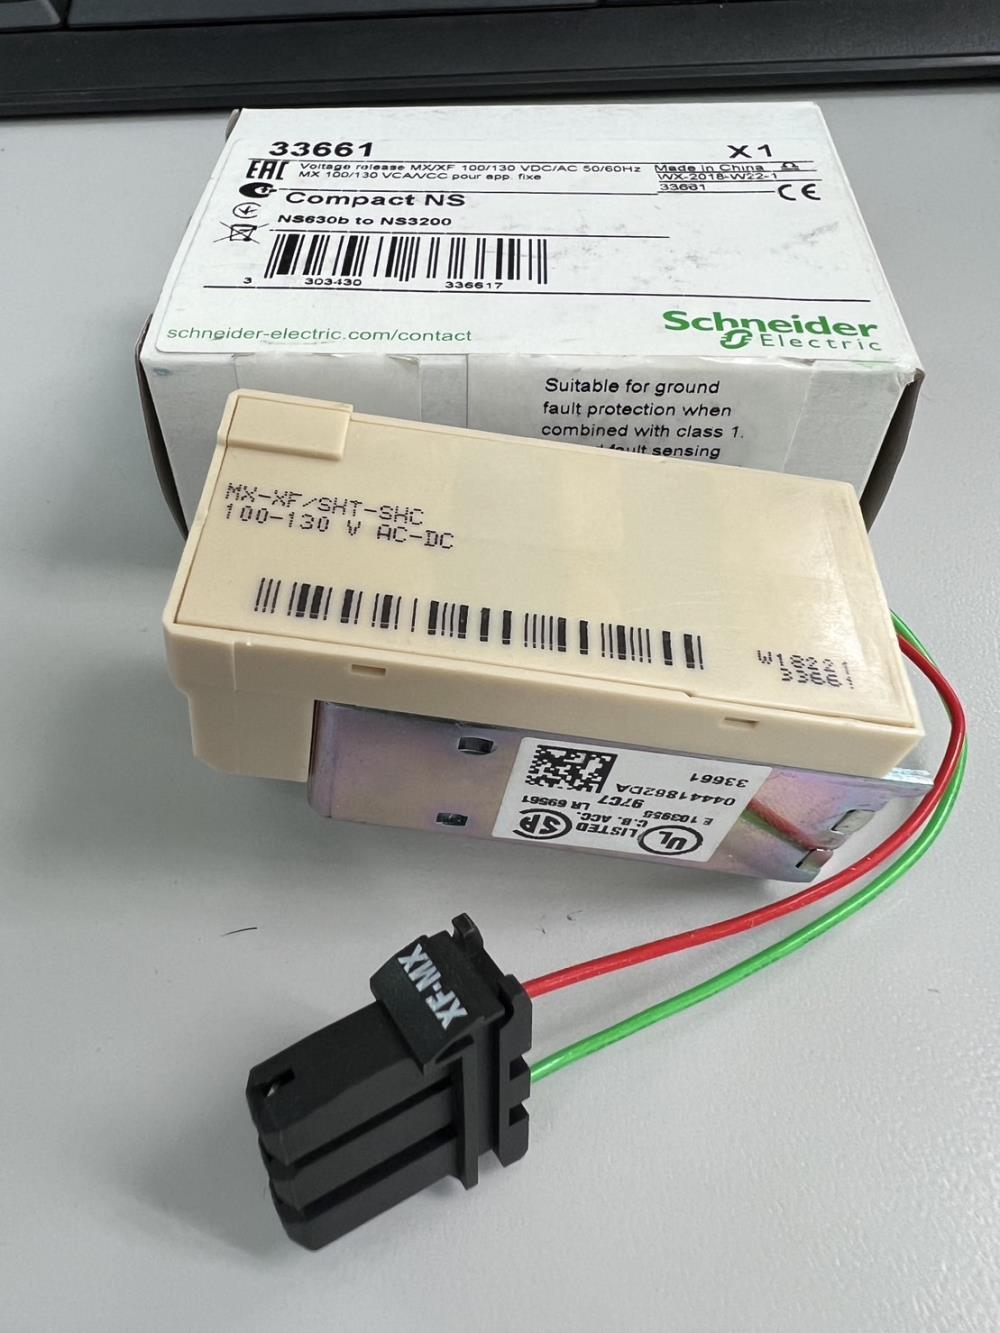 Schneider Electric 33661 Voltage release MX,Schneider Electric 33661 Voltage release MX Voltage release MX, ComPacT NS630b/NS3200, fixed, 100/130V AC/DC,Schneider Electric 33661 Voltage release MX,Automation and Electronics/Access Control Systems